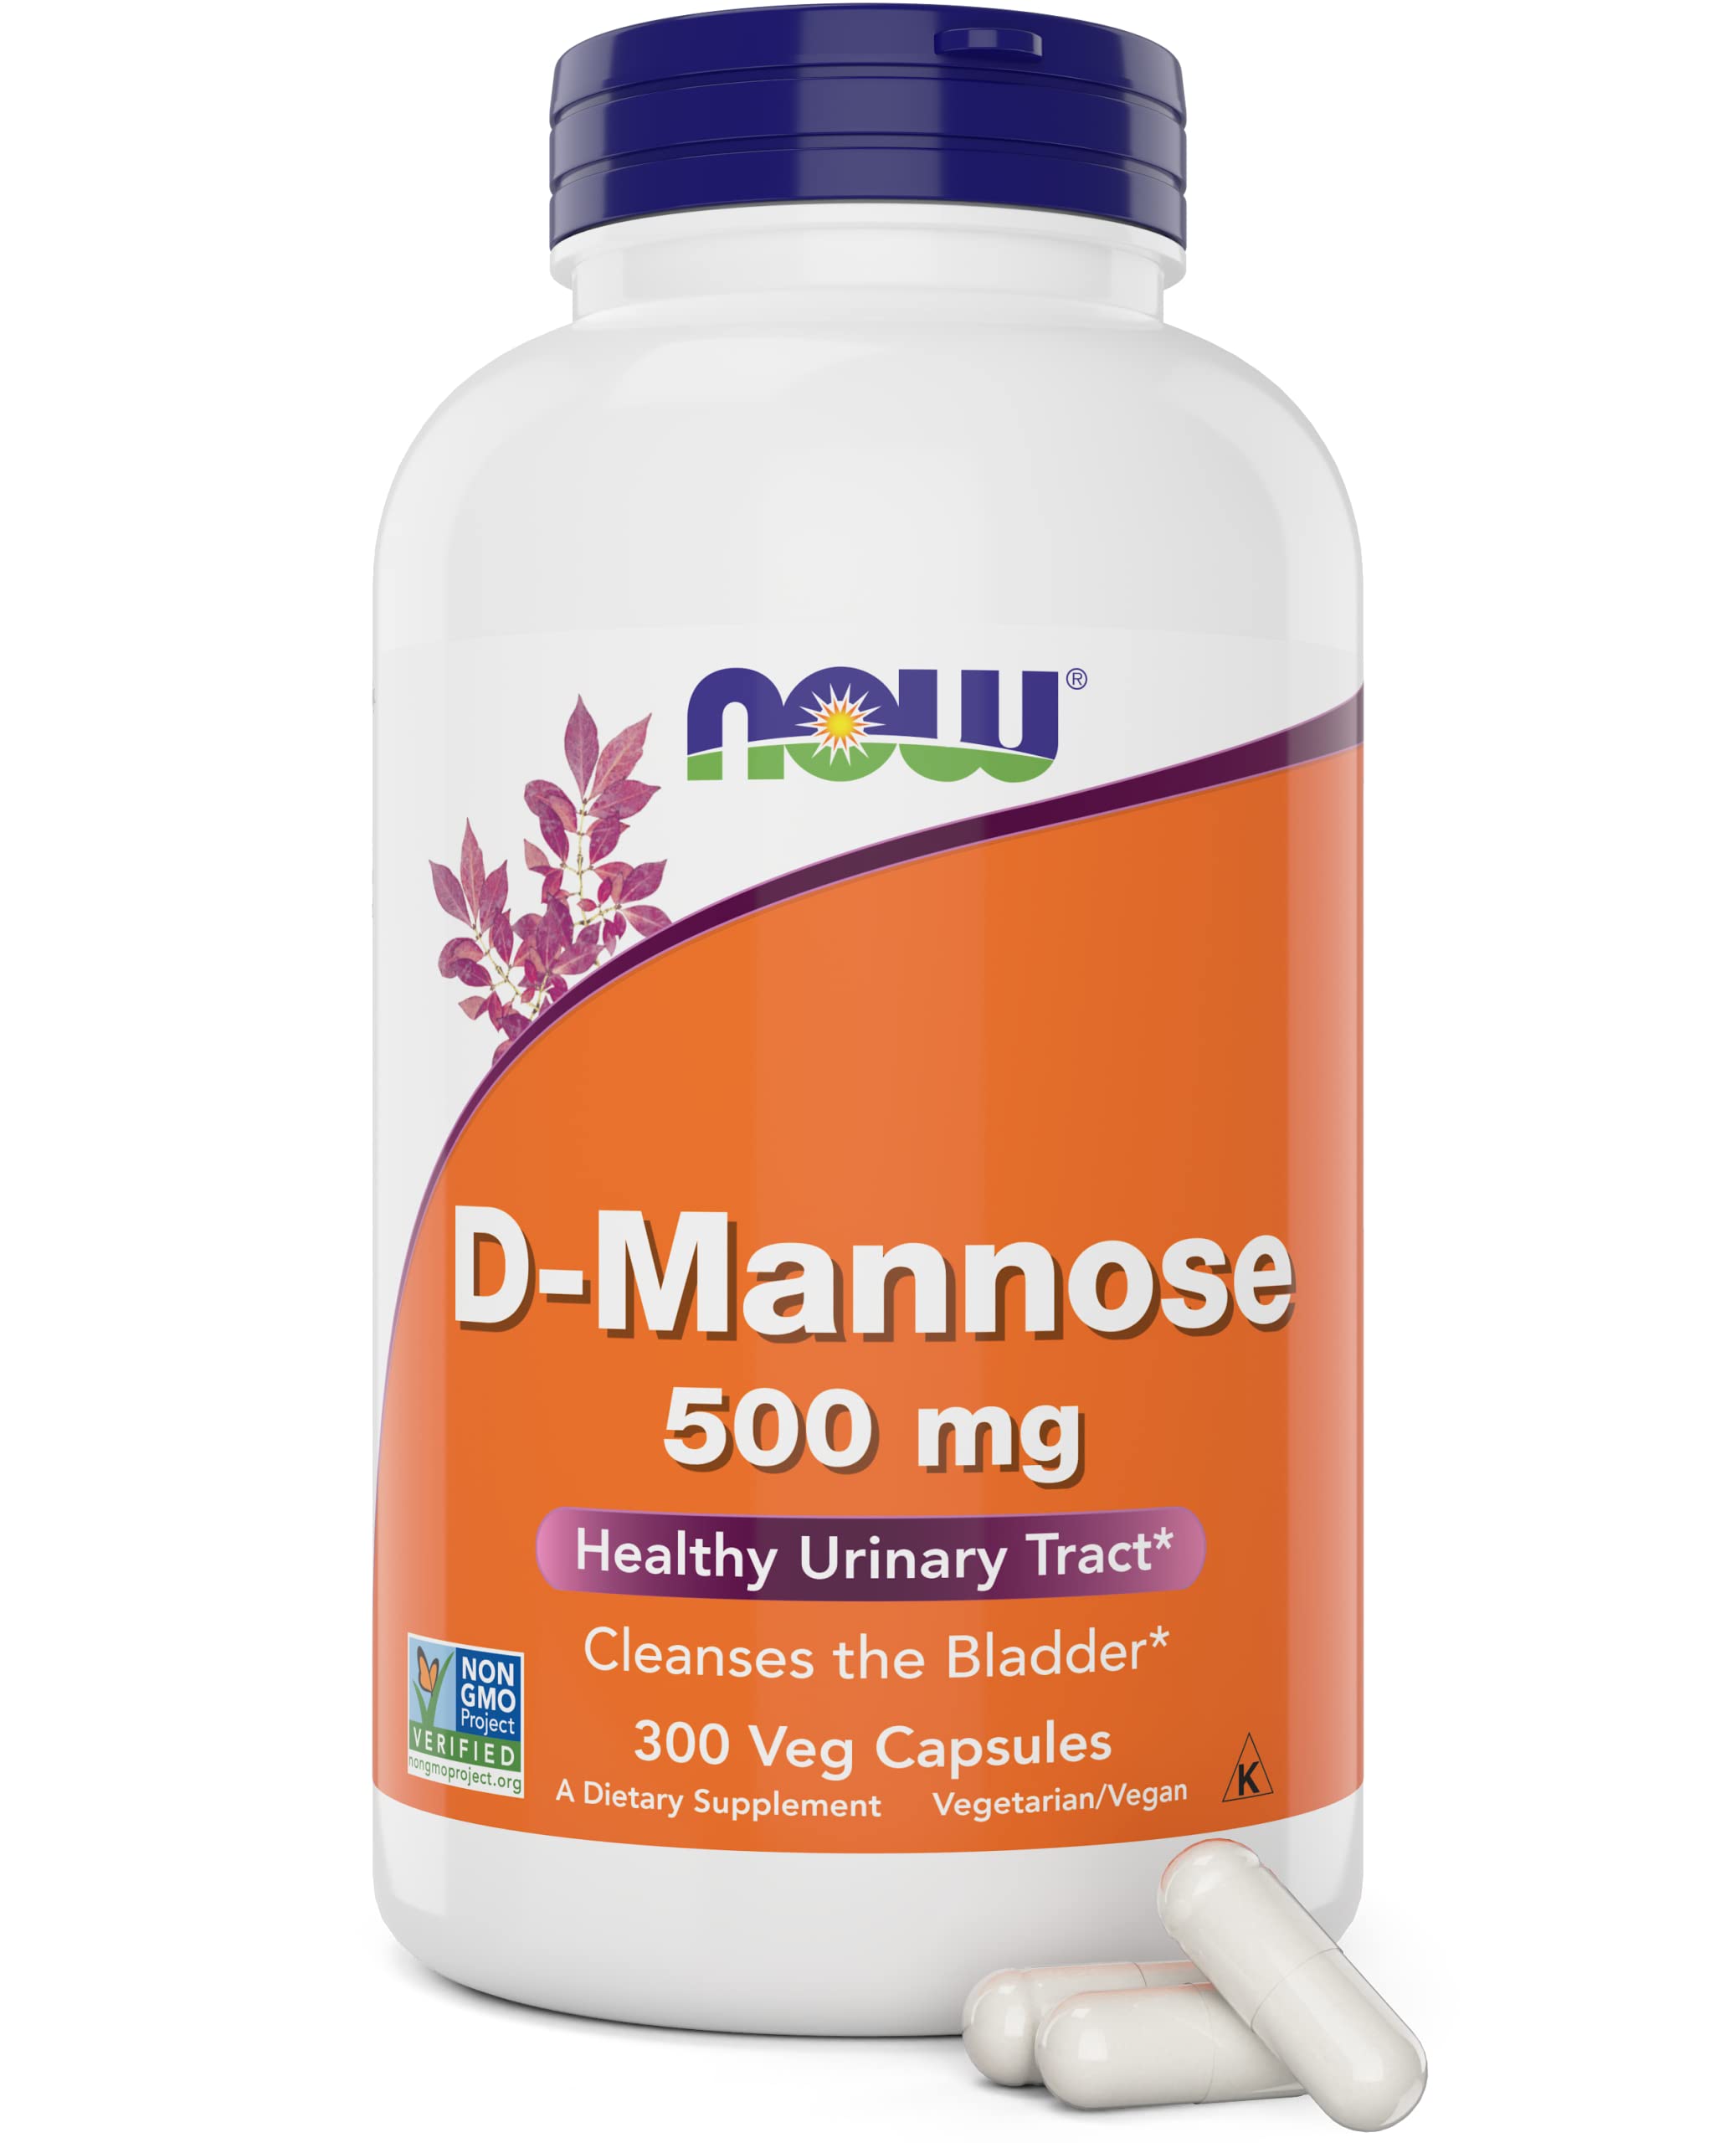 Now Foods Now D-Mannose 500 mg, 300 Capsules - Vegan, Non GMO Supplement for Women and Men - Supports Healthy Urinary Tract, Cleanses The 